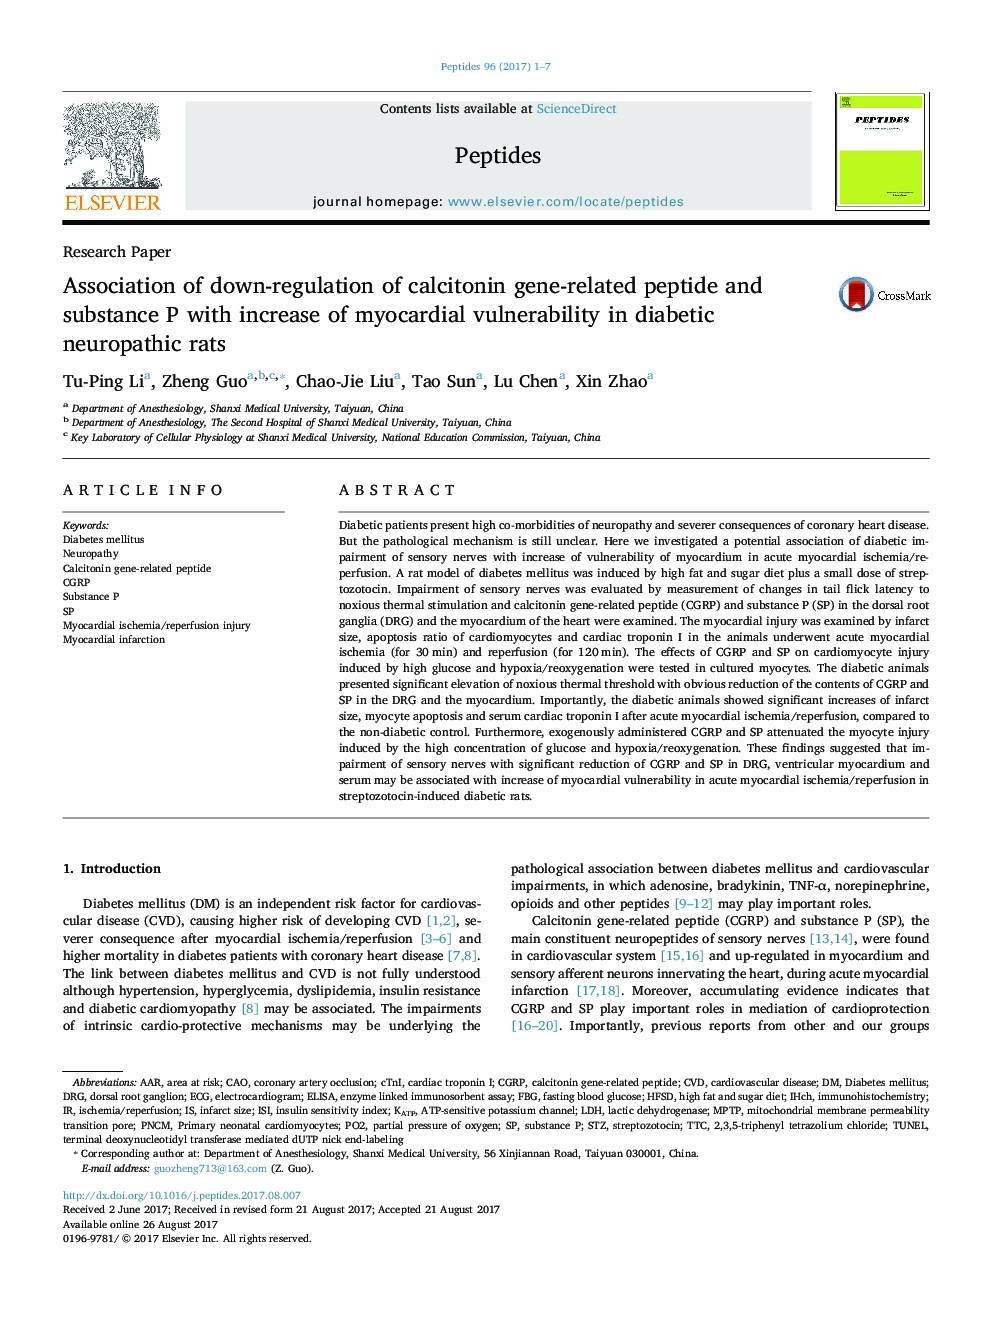 Research PaperAssociation of down-regulation of calcitonin gene-related peptide and substance P with increase of myocardial vulnerability in diabetic neuropathic rats